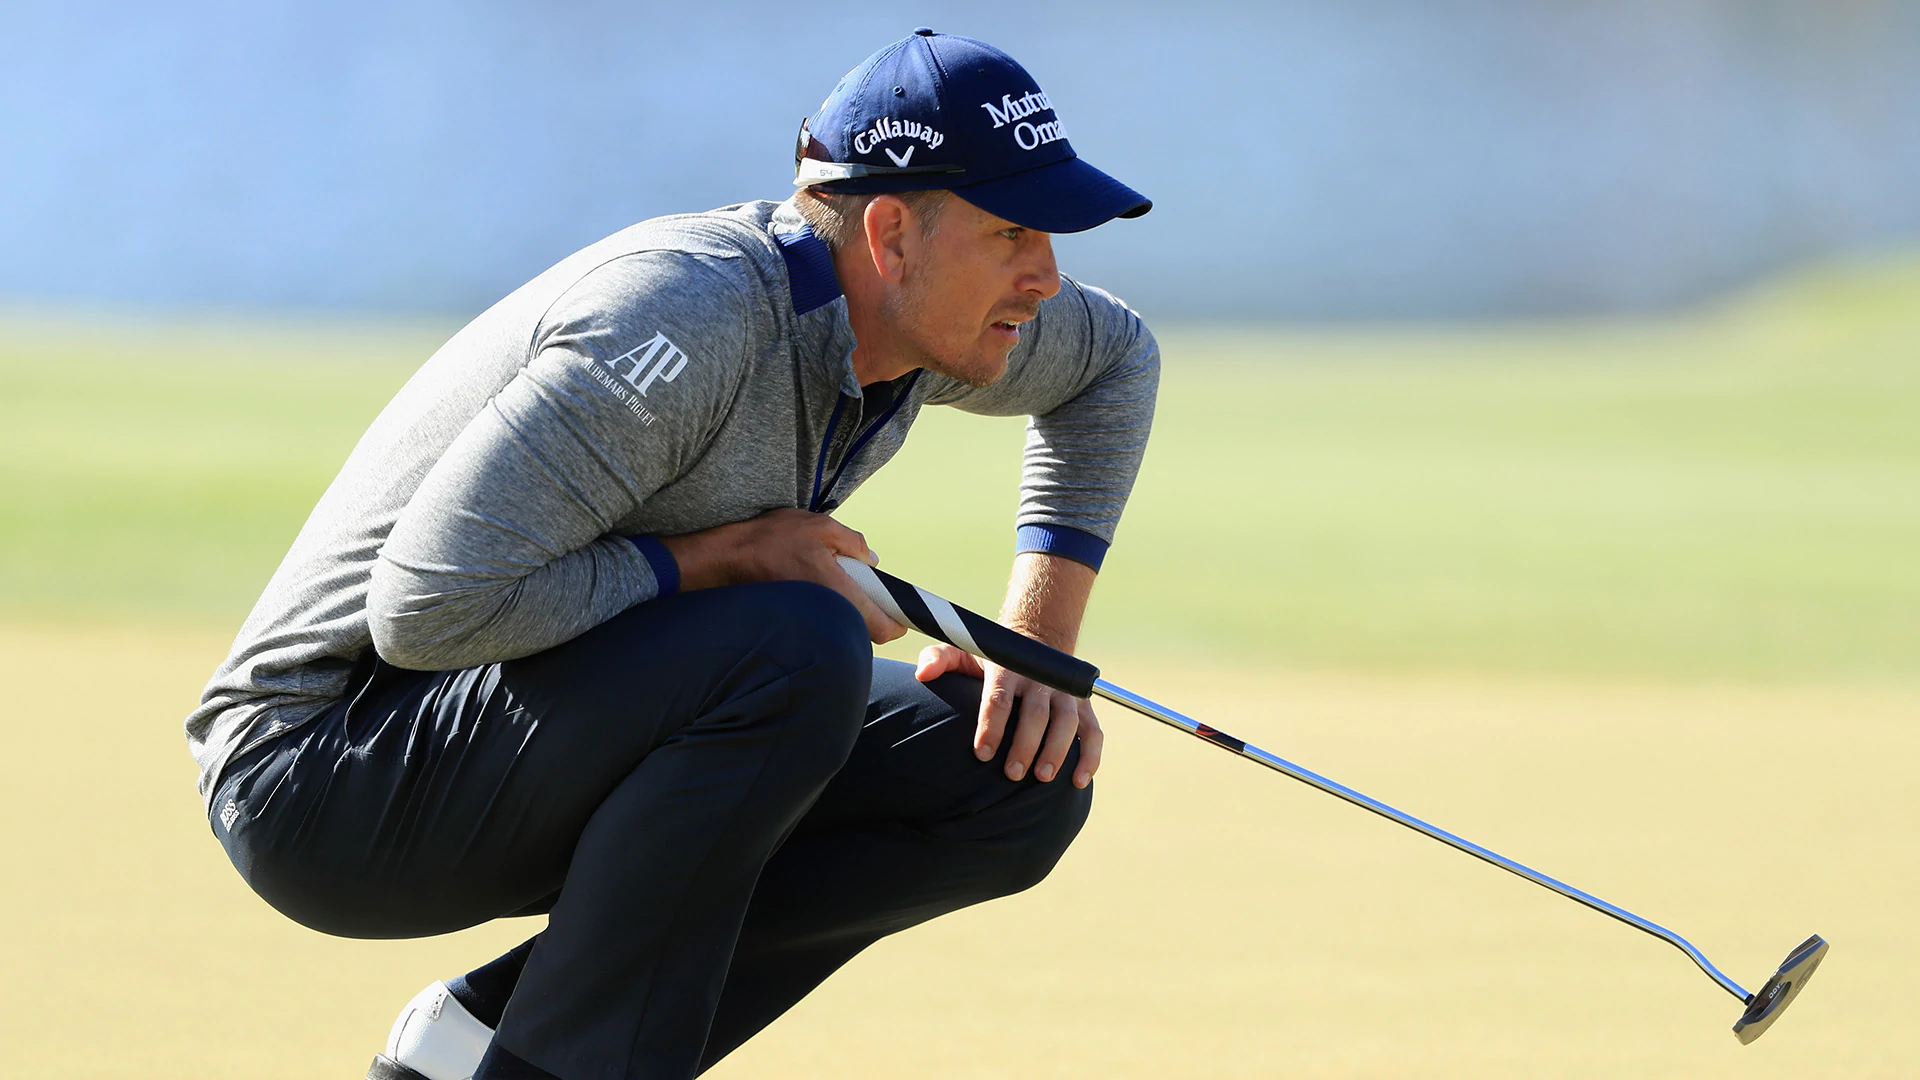 From MC to co-leading, Stenson looks solid at API